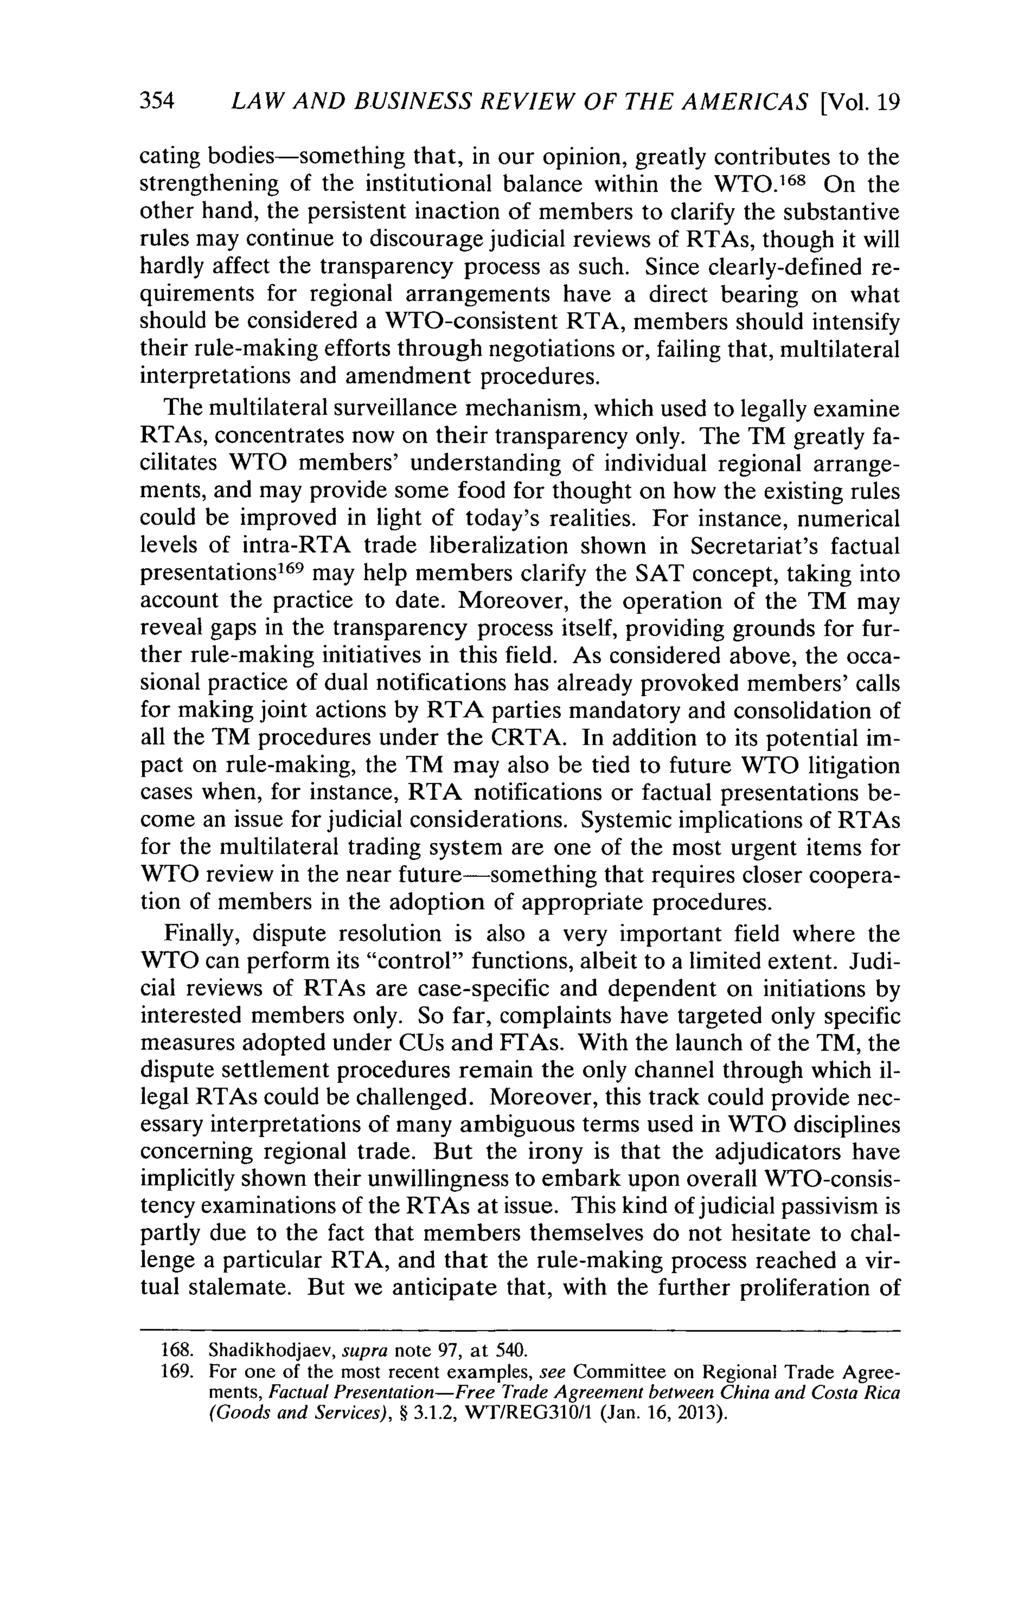 354 LAW AND BUSINESS REVIEW OF THE AMERICAS [Vol. 19 cating bodies-something that, in our opinion, greatly contributes to the strengthening of the institutional balance within the WTO.